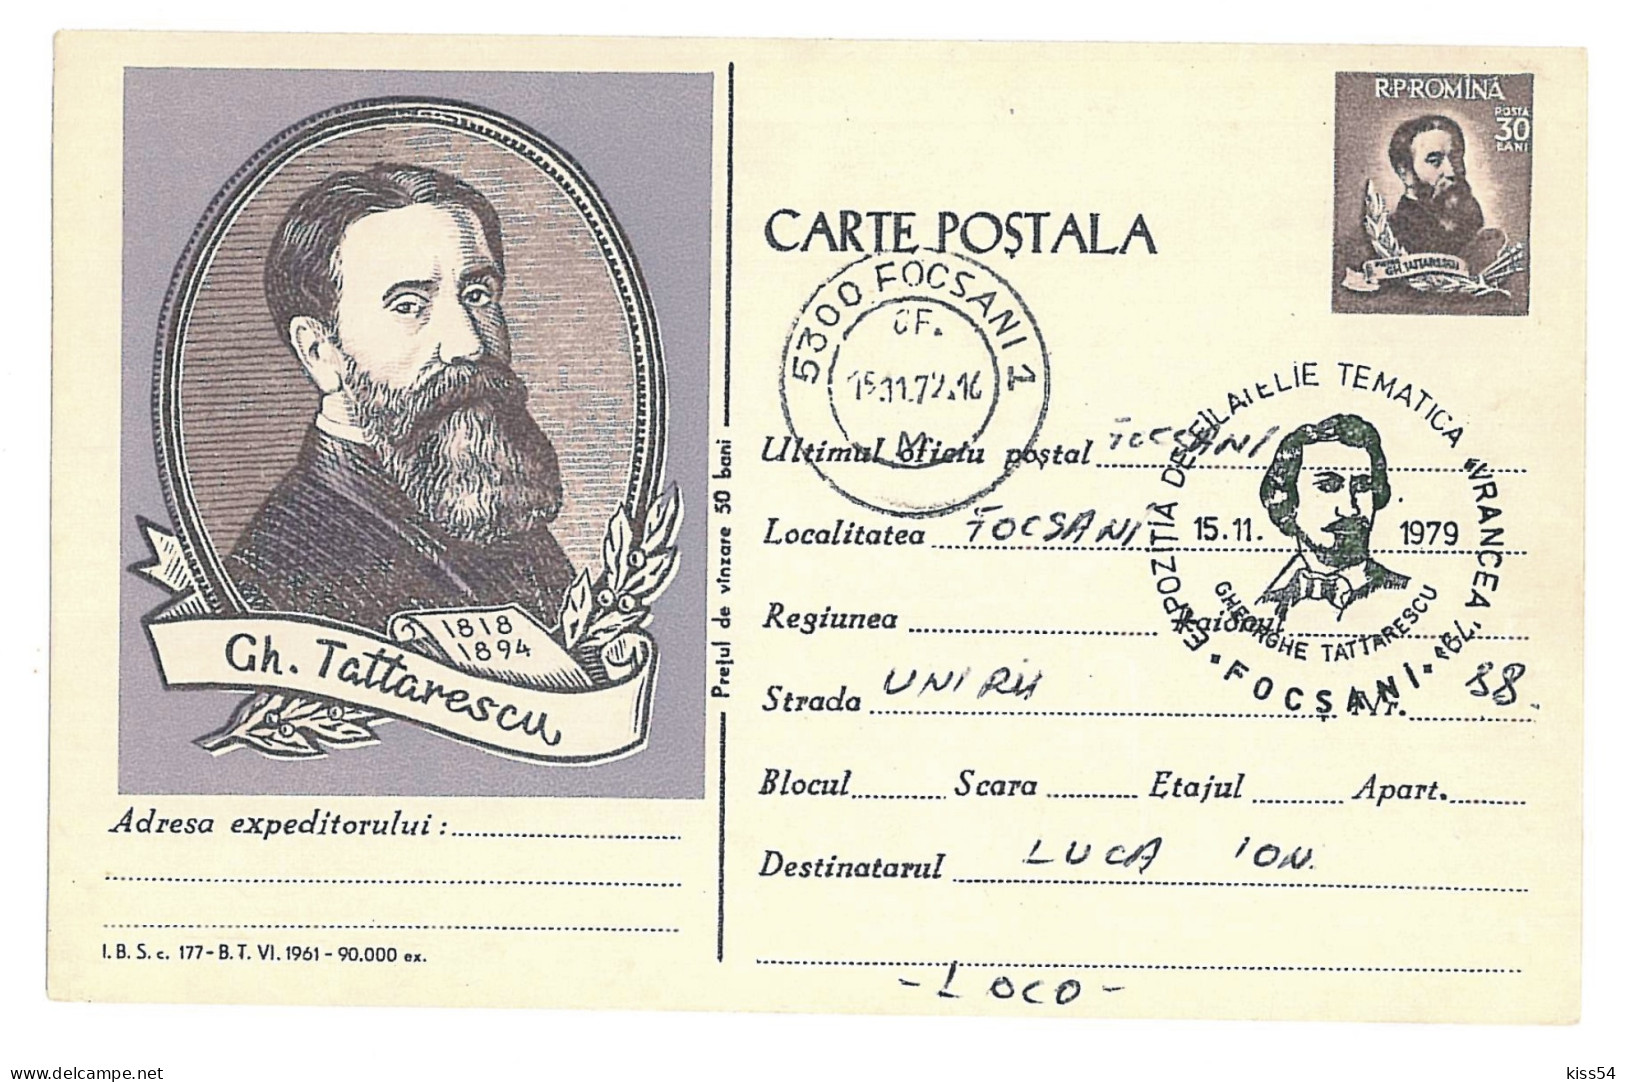 IP 61 - 0177f Painter Gheorghe TATTARESCU - Stationery - Used - 1961 - Postal Stationery